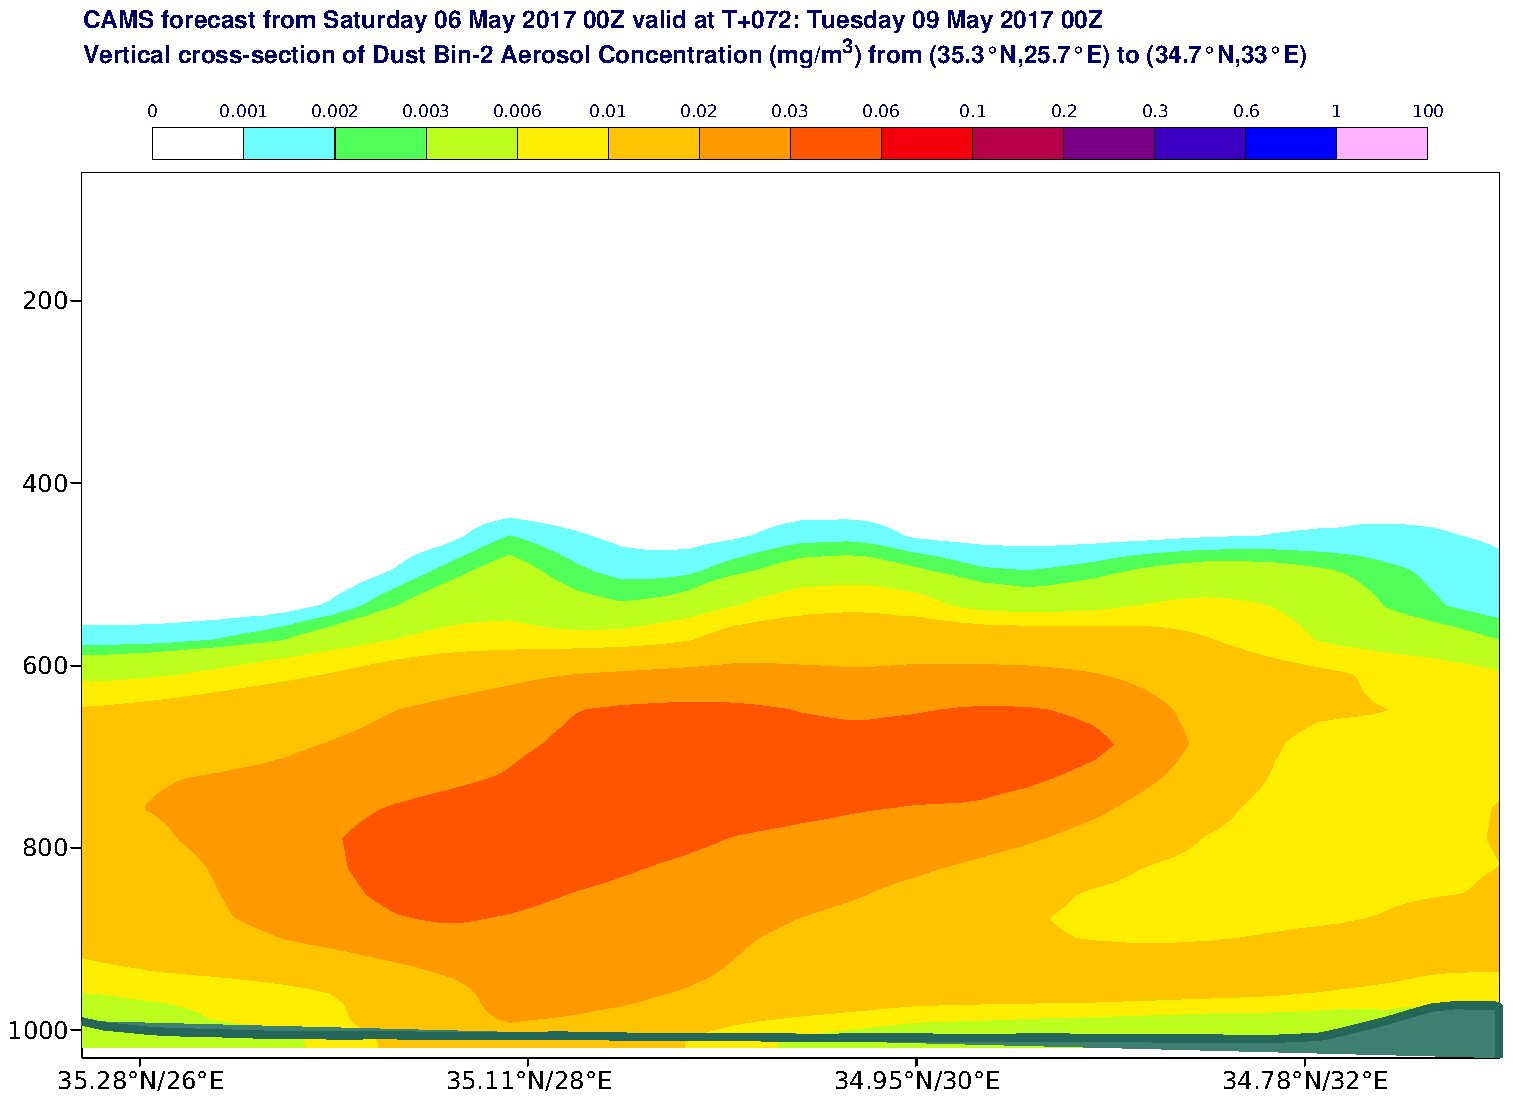 Vertical cross-section of Dust Bin-2 Aerosol Concentration (mg/m3) valid at T72 - 2017-05-09 00:00